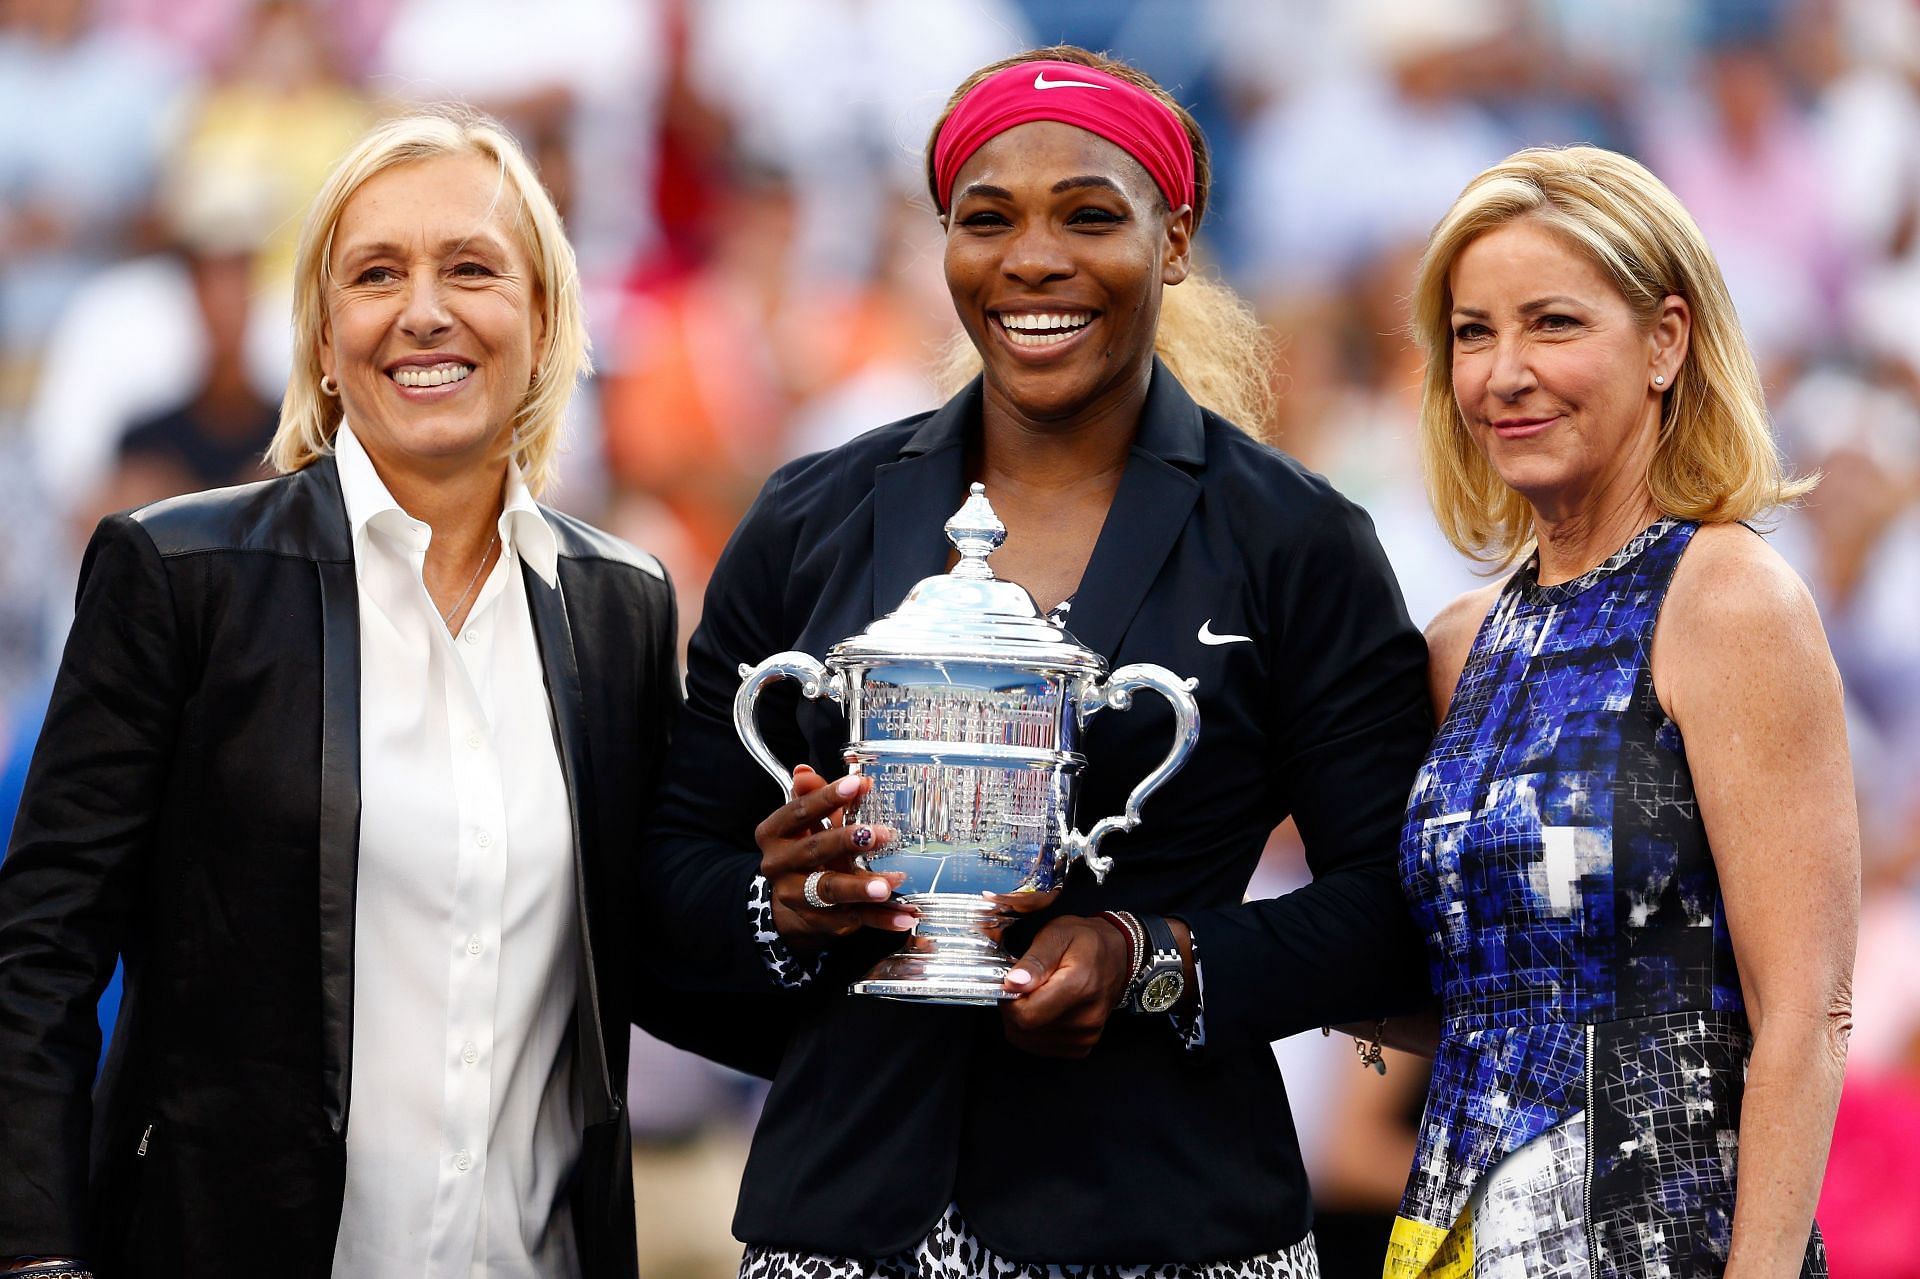 Martina Navratilova and Chris Evert on either side of Serena Williams after the latter won the 2014 US Open